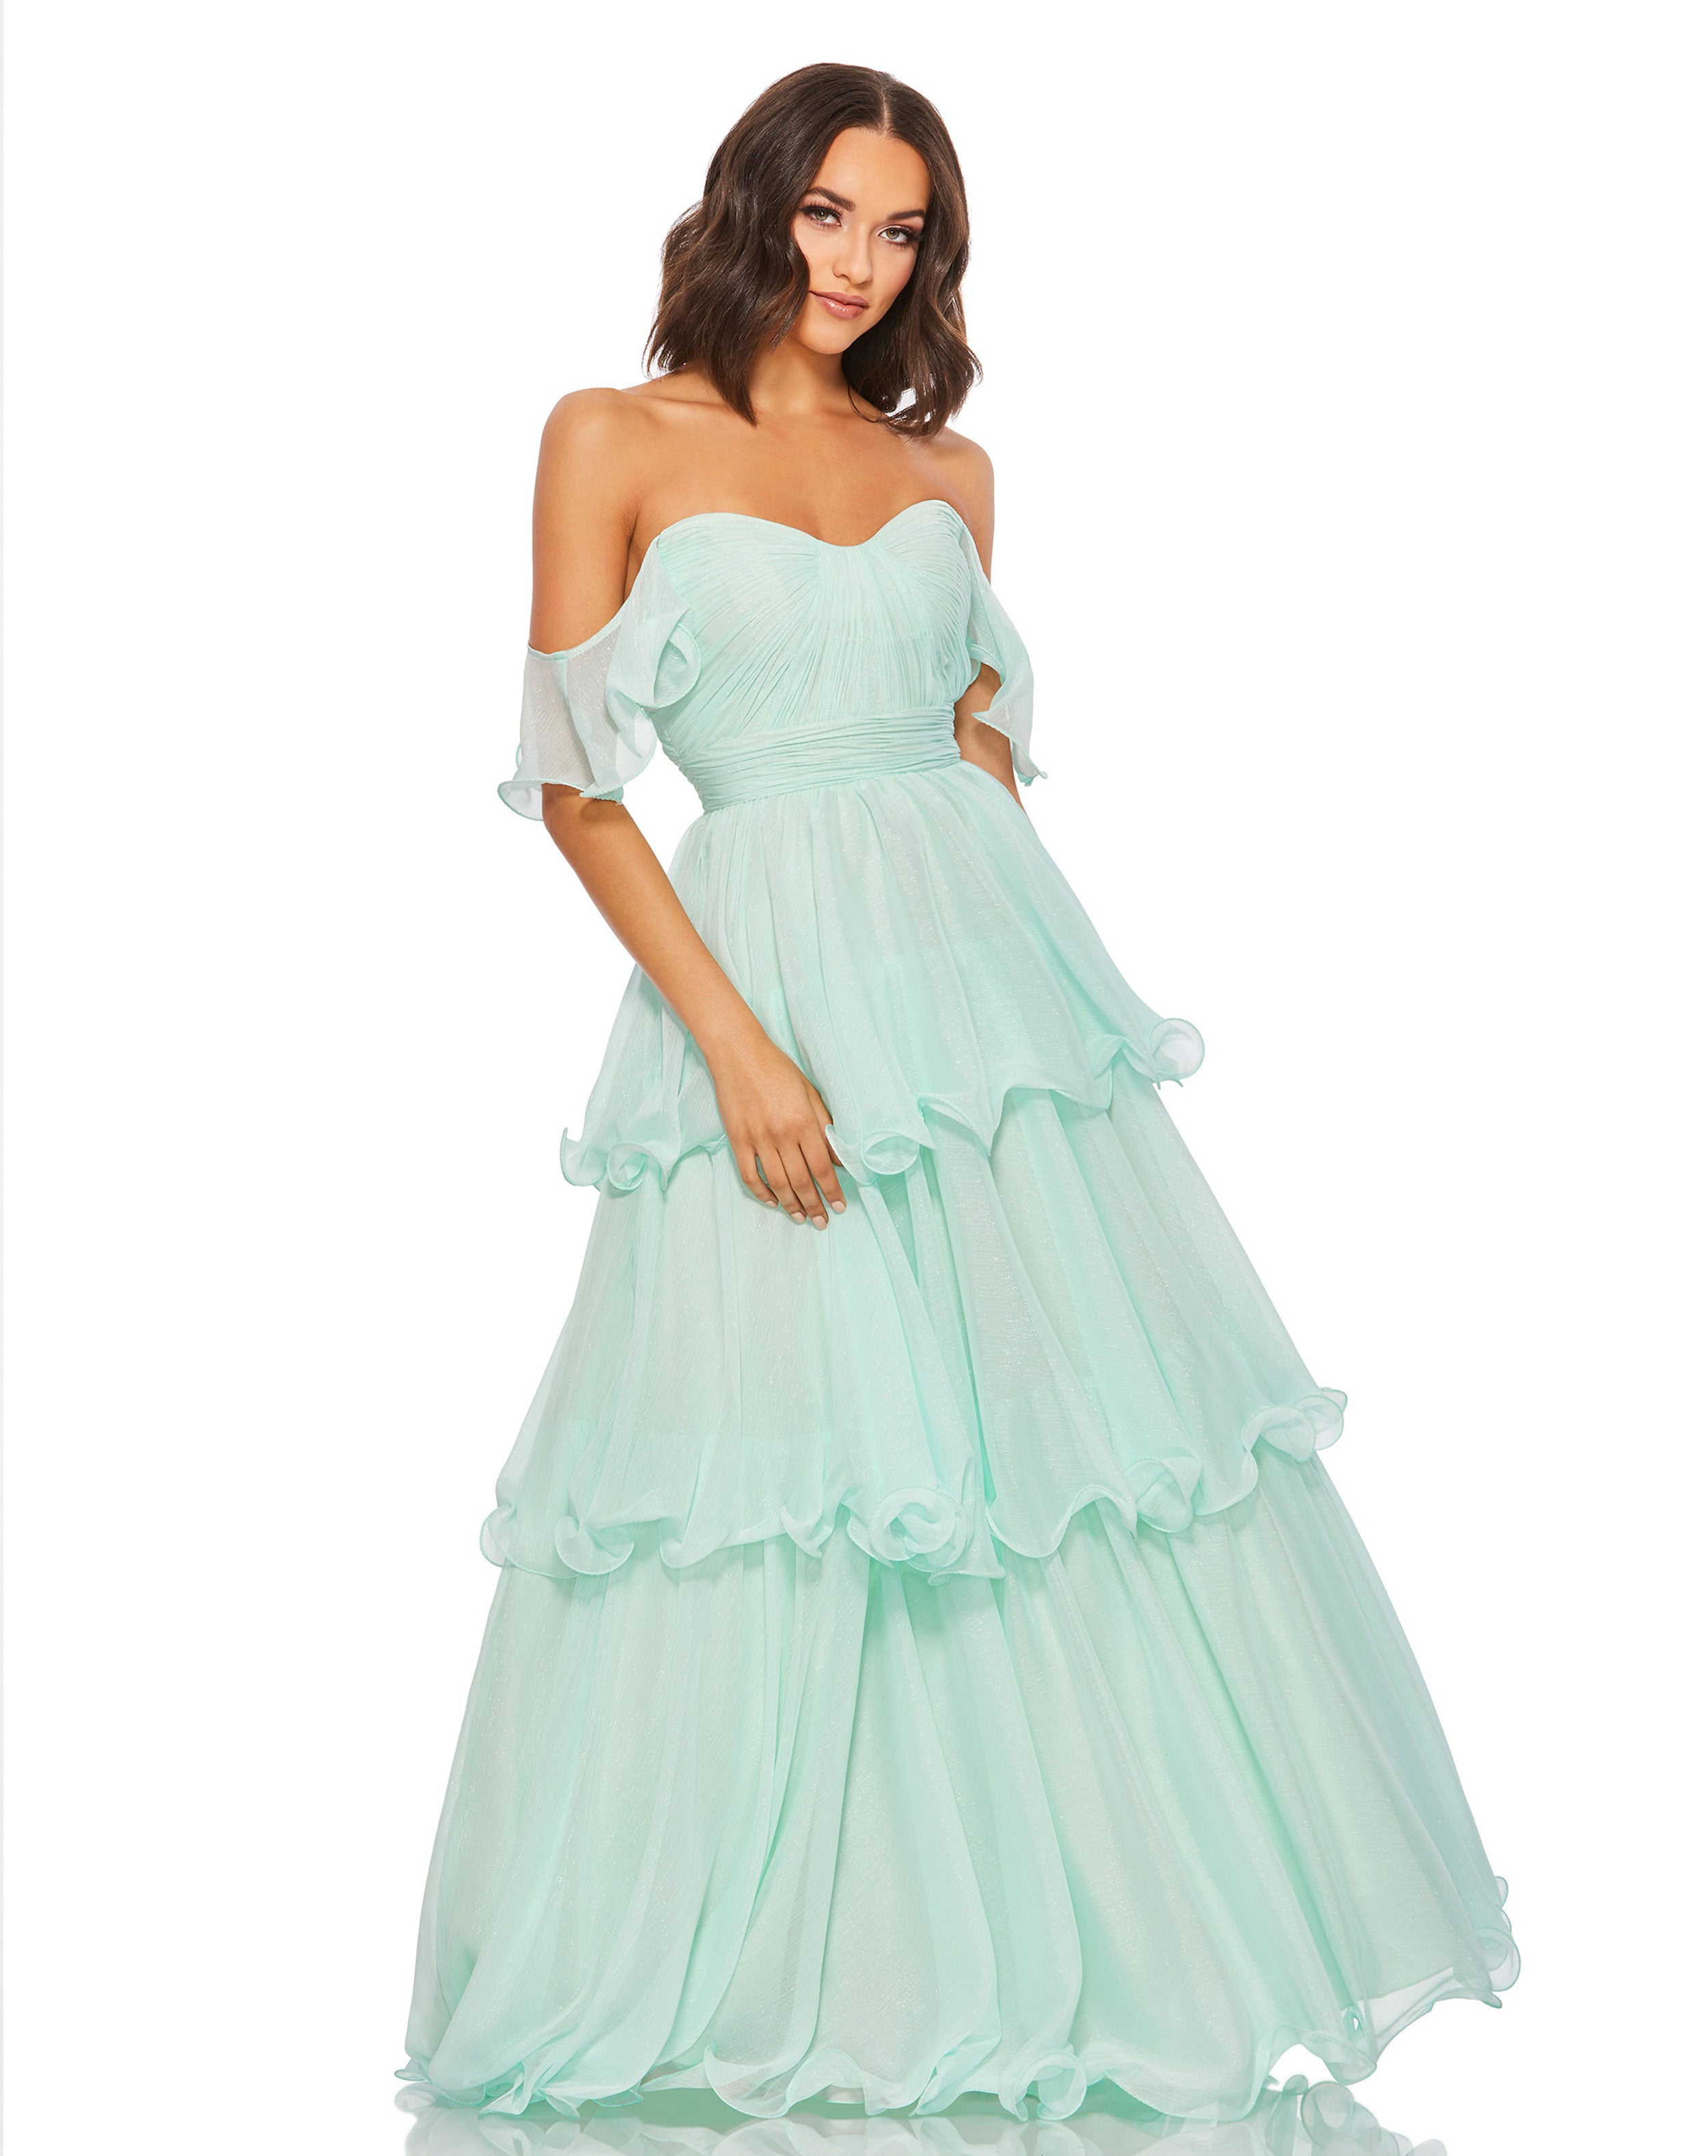 Tiered Chiffon Ball Gown